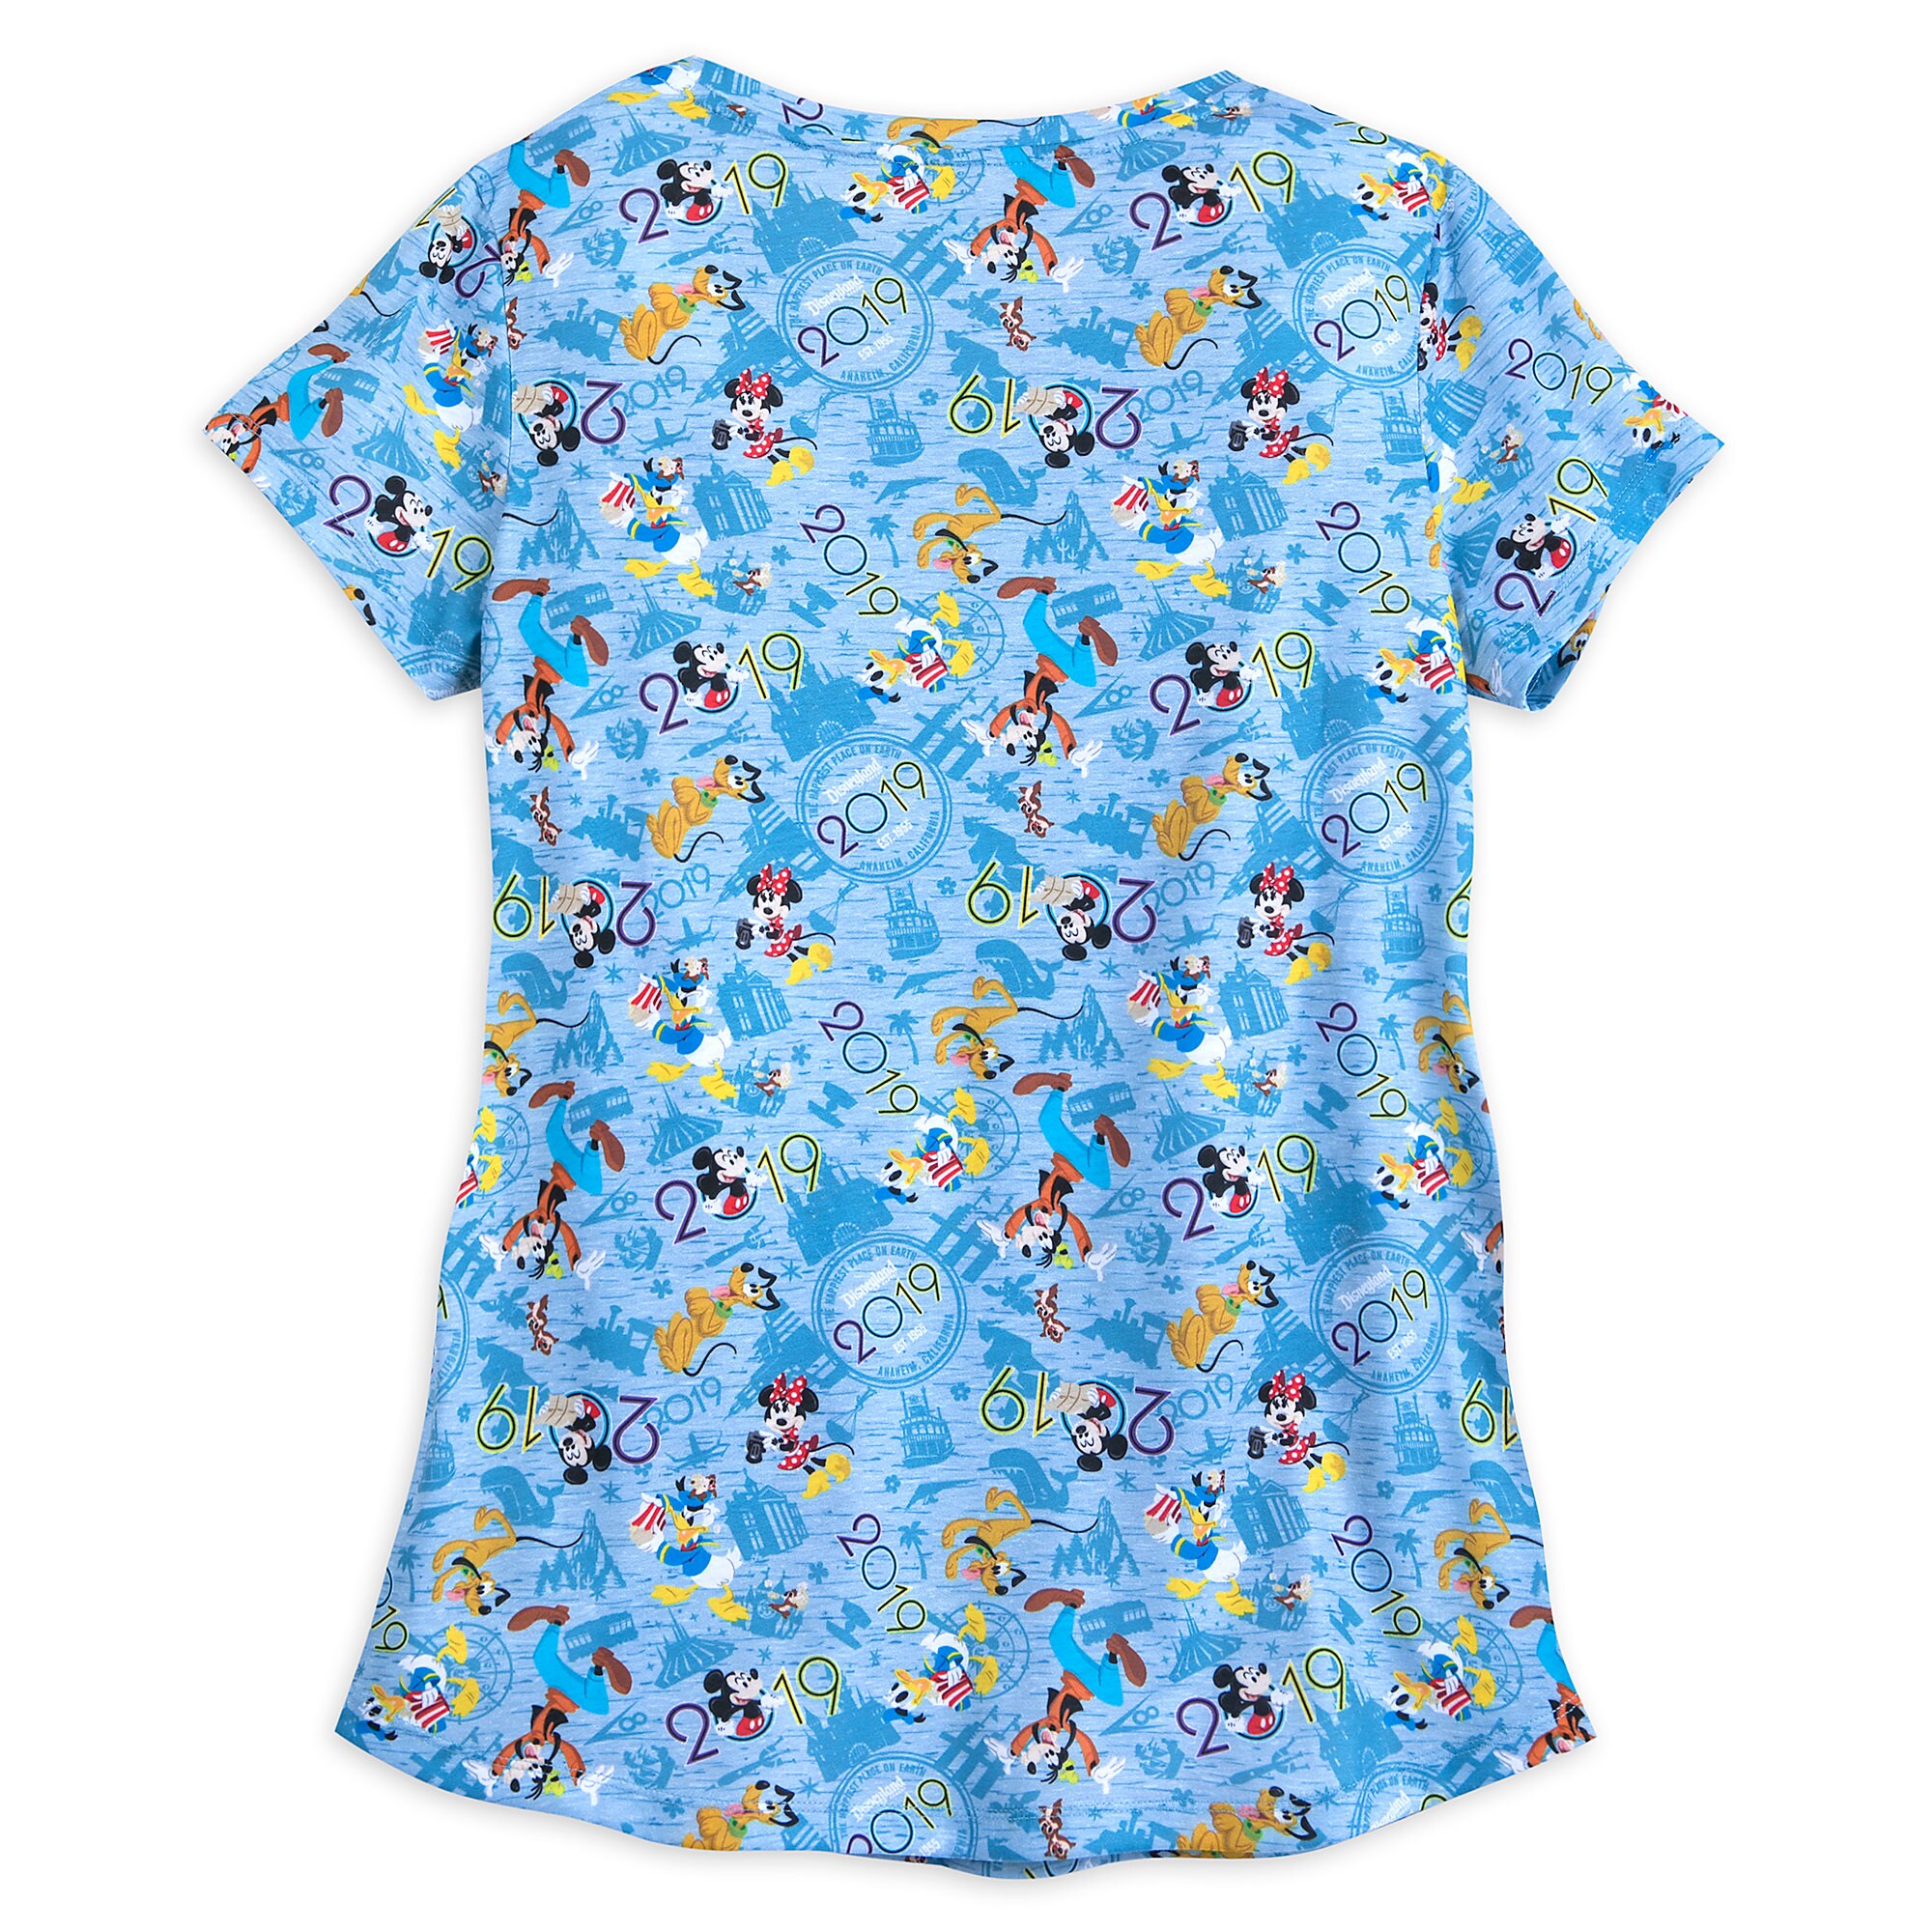 Mickey Mouse and Friends T-Shirt for Women - Disneyland 2019